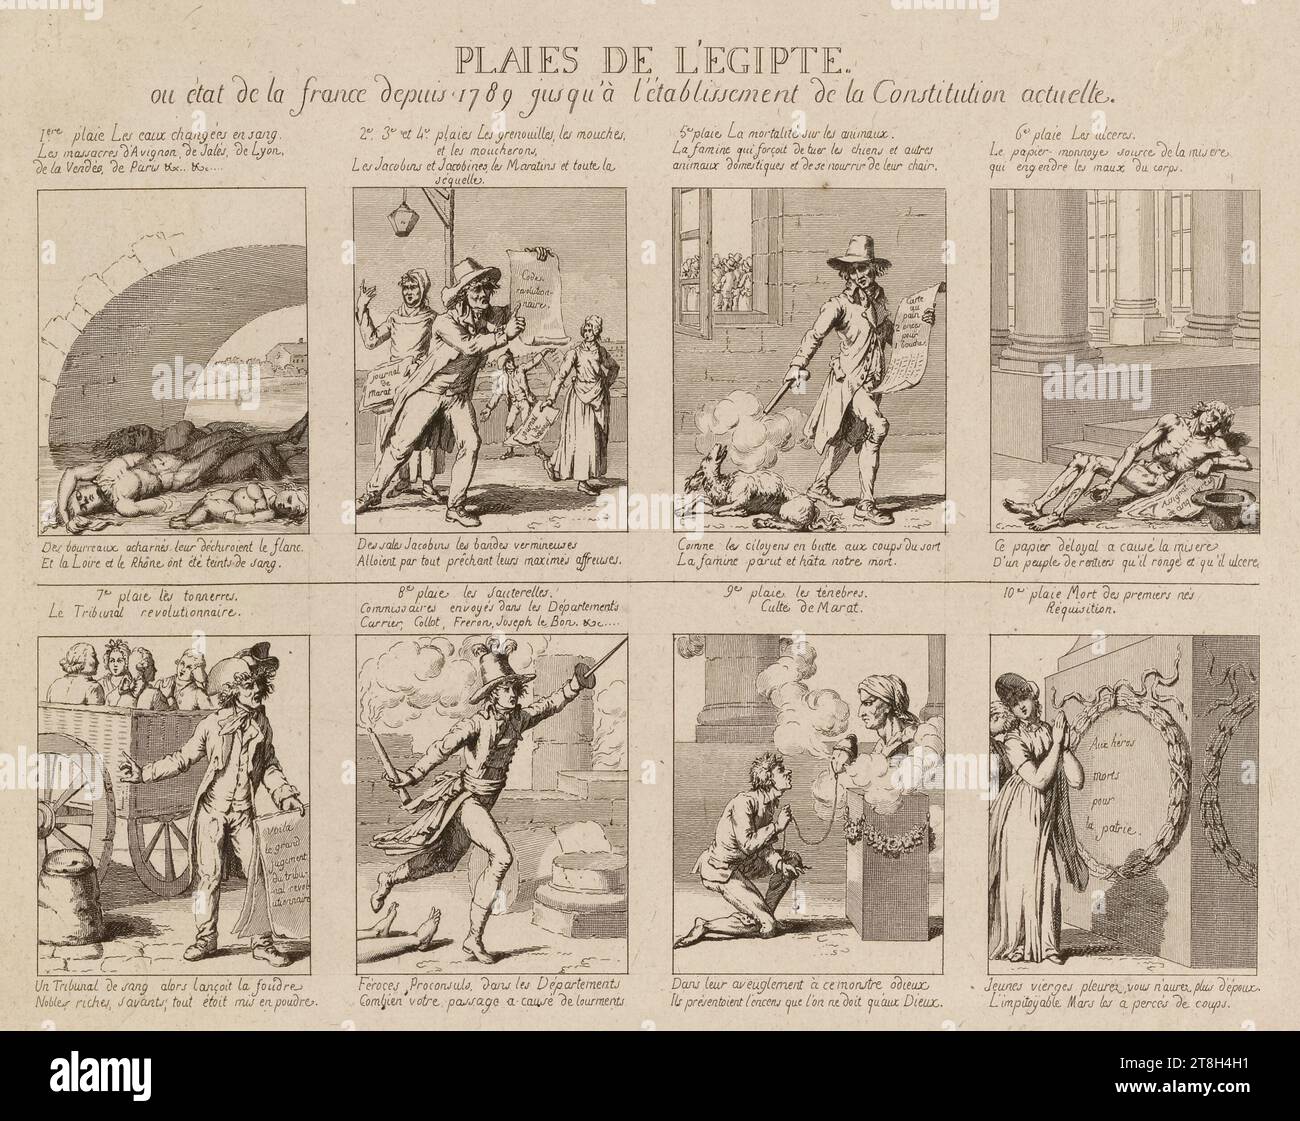 Plagues de l'Egipte., ou state of France from 1789 until the establishment of the present Constitution, Engraver, In 1800, Print, Graphic arts, French Revolution, Print, Dimensions - Work: Height: 21 cm, Width: 25.4 cm, Dimensions - Mounting:, Height: 32.7 cm, Width: 50.3 cm Stock Photo